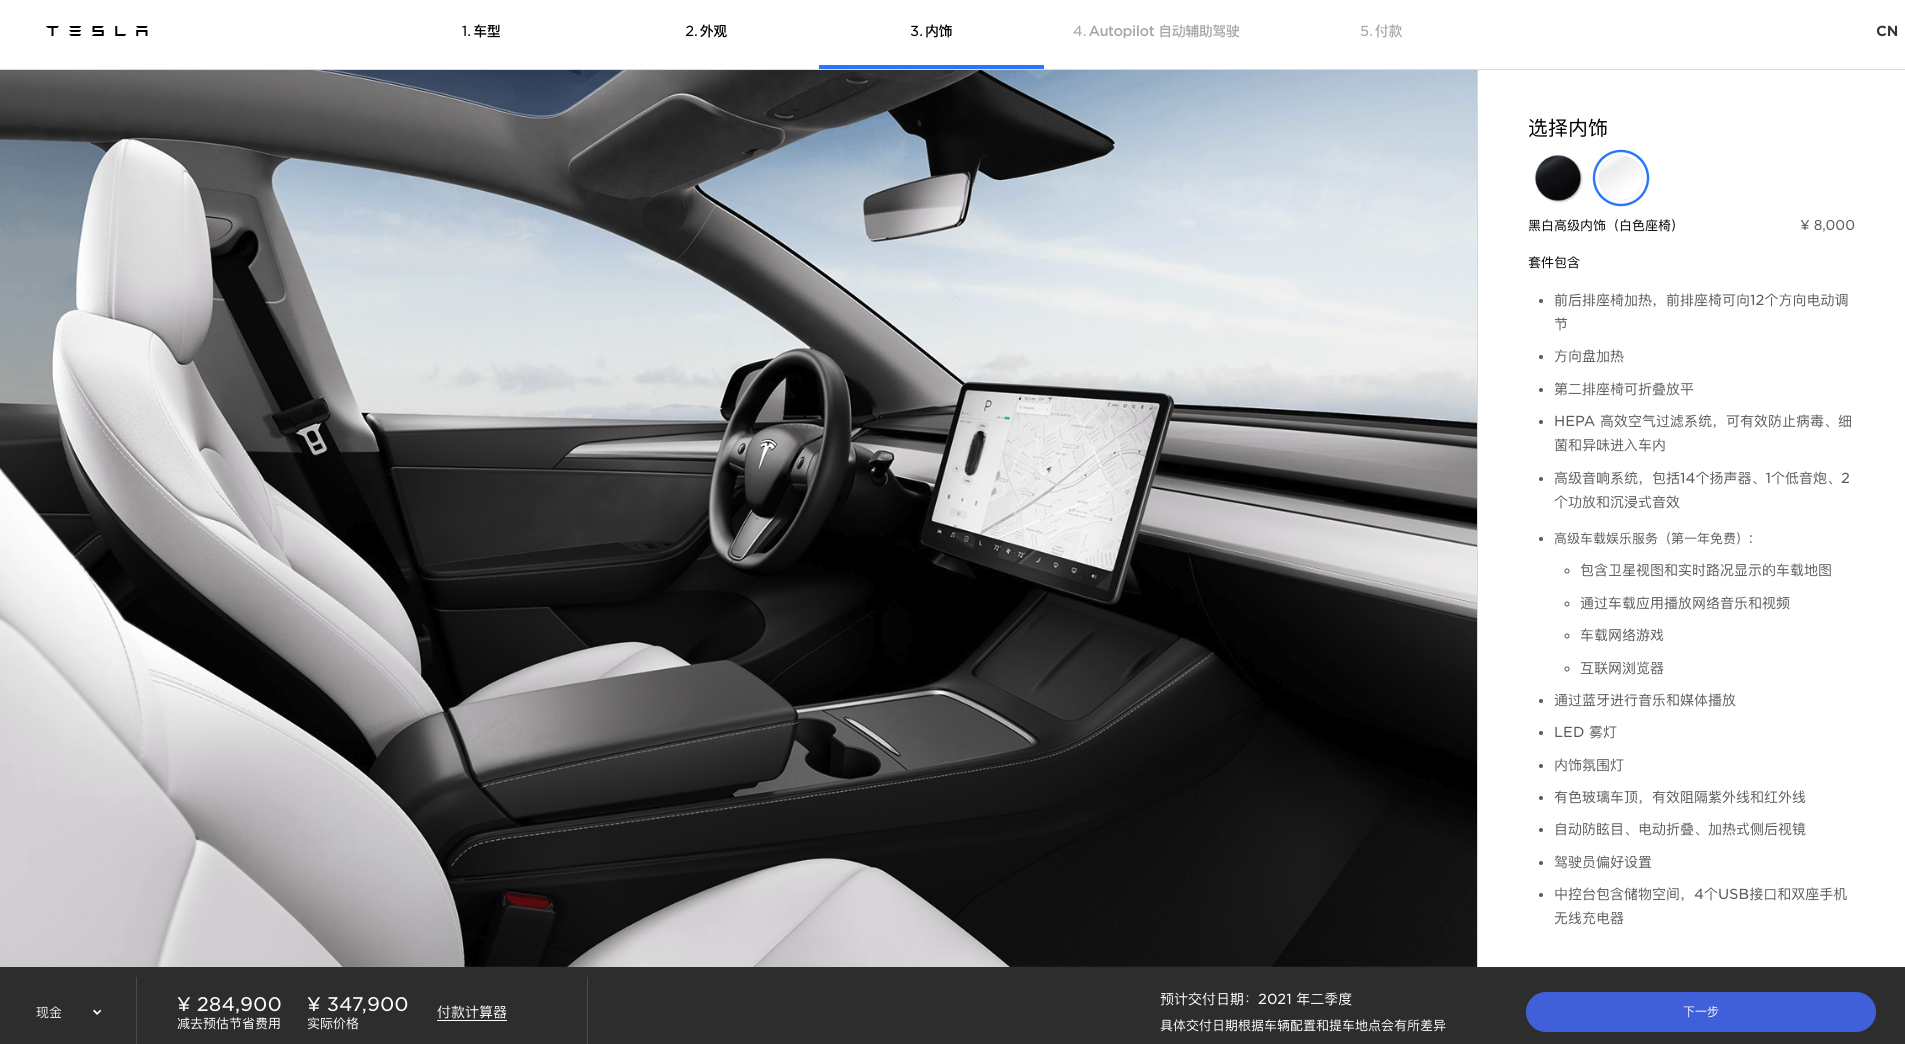 Tesla updates Design Studio in China to add white paint and interior